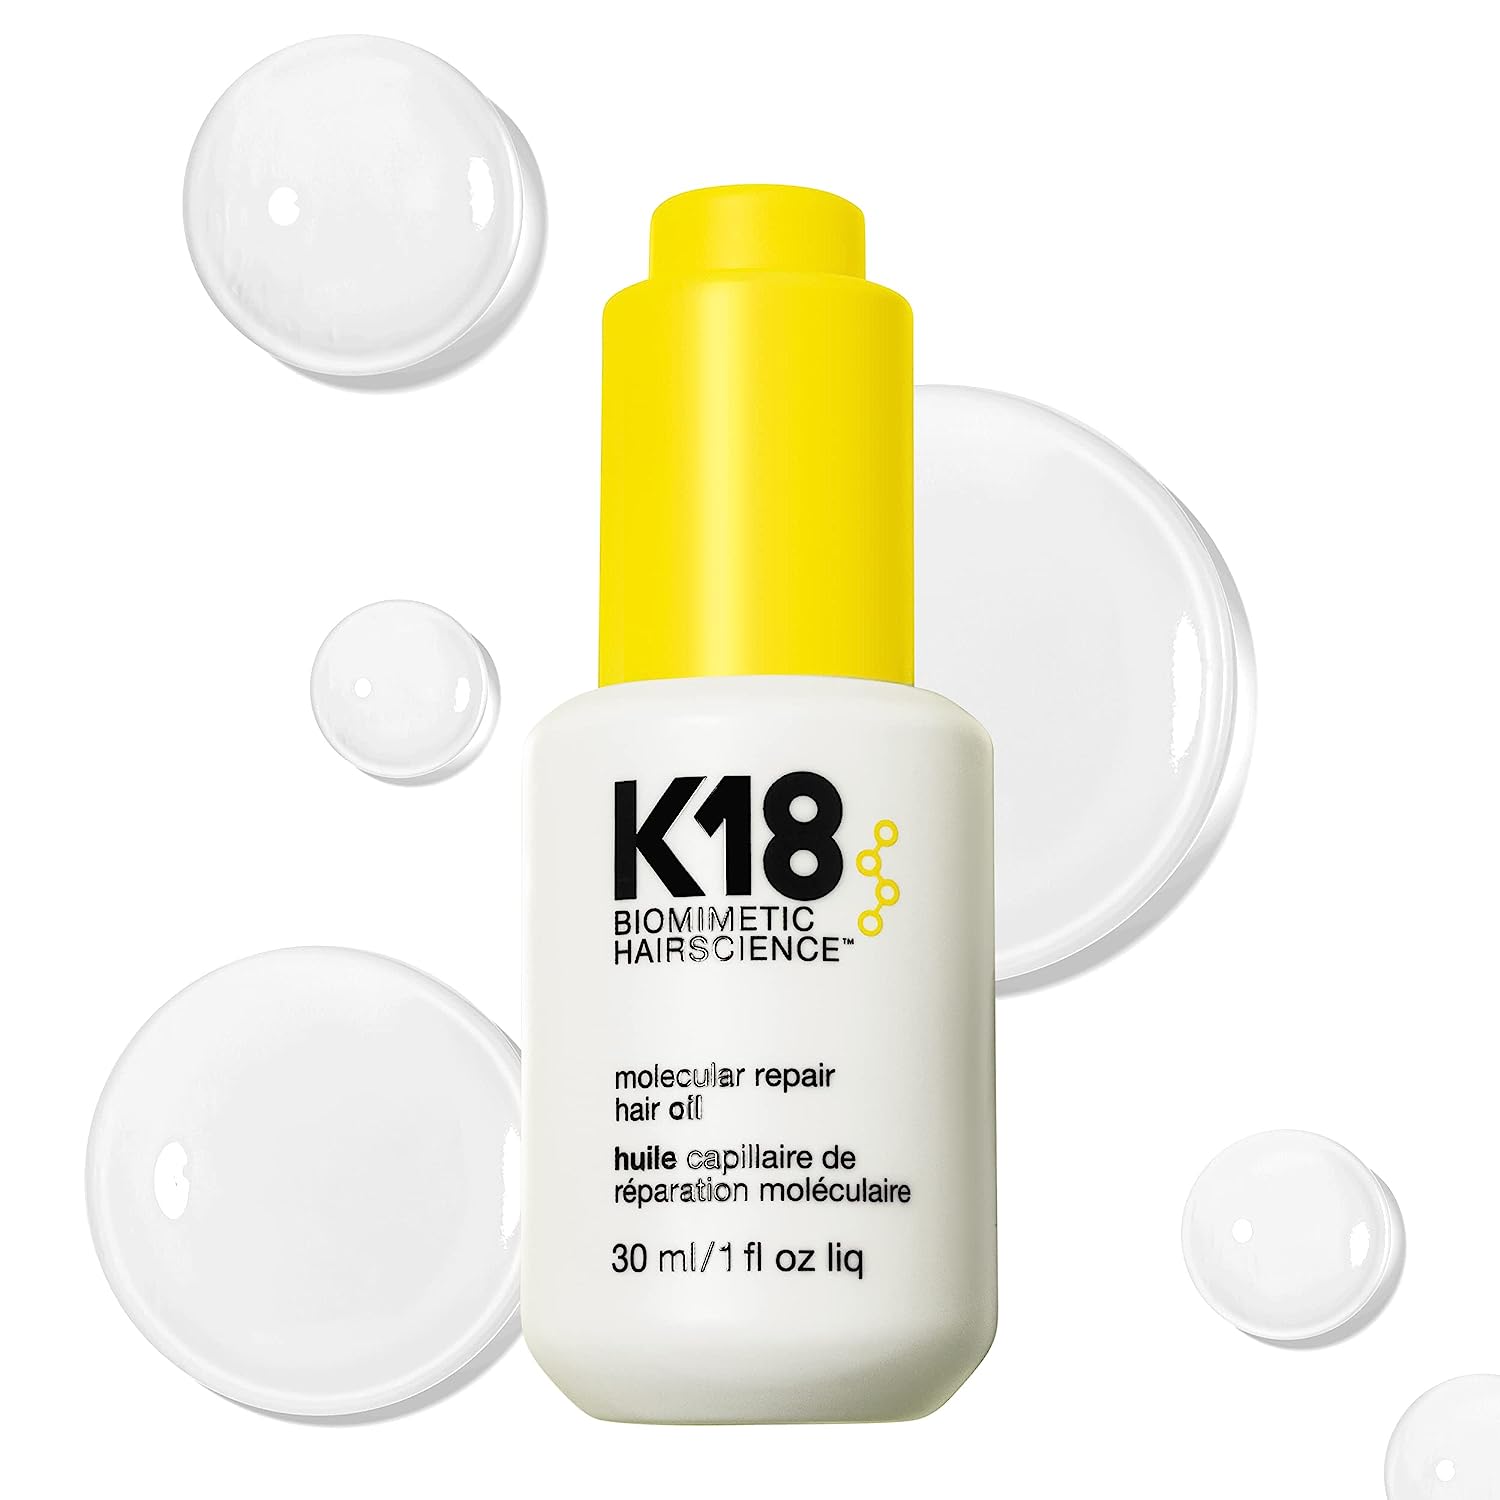 K18 Molecular Repair Hair Oil - Weightless Oil Strengthens, Repairs Damage, Reduces Frizz, Impoves Shine for All Hair Types - 30 ml